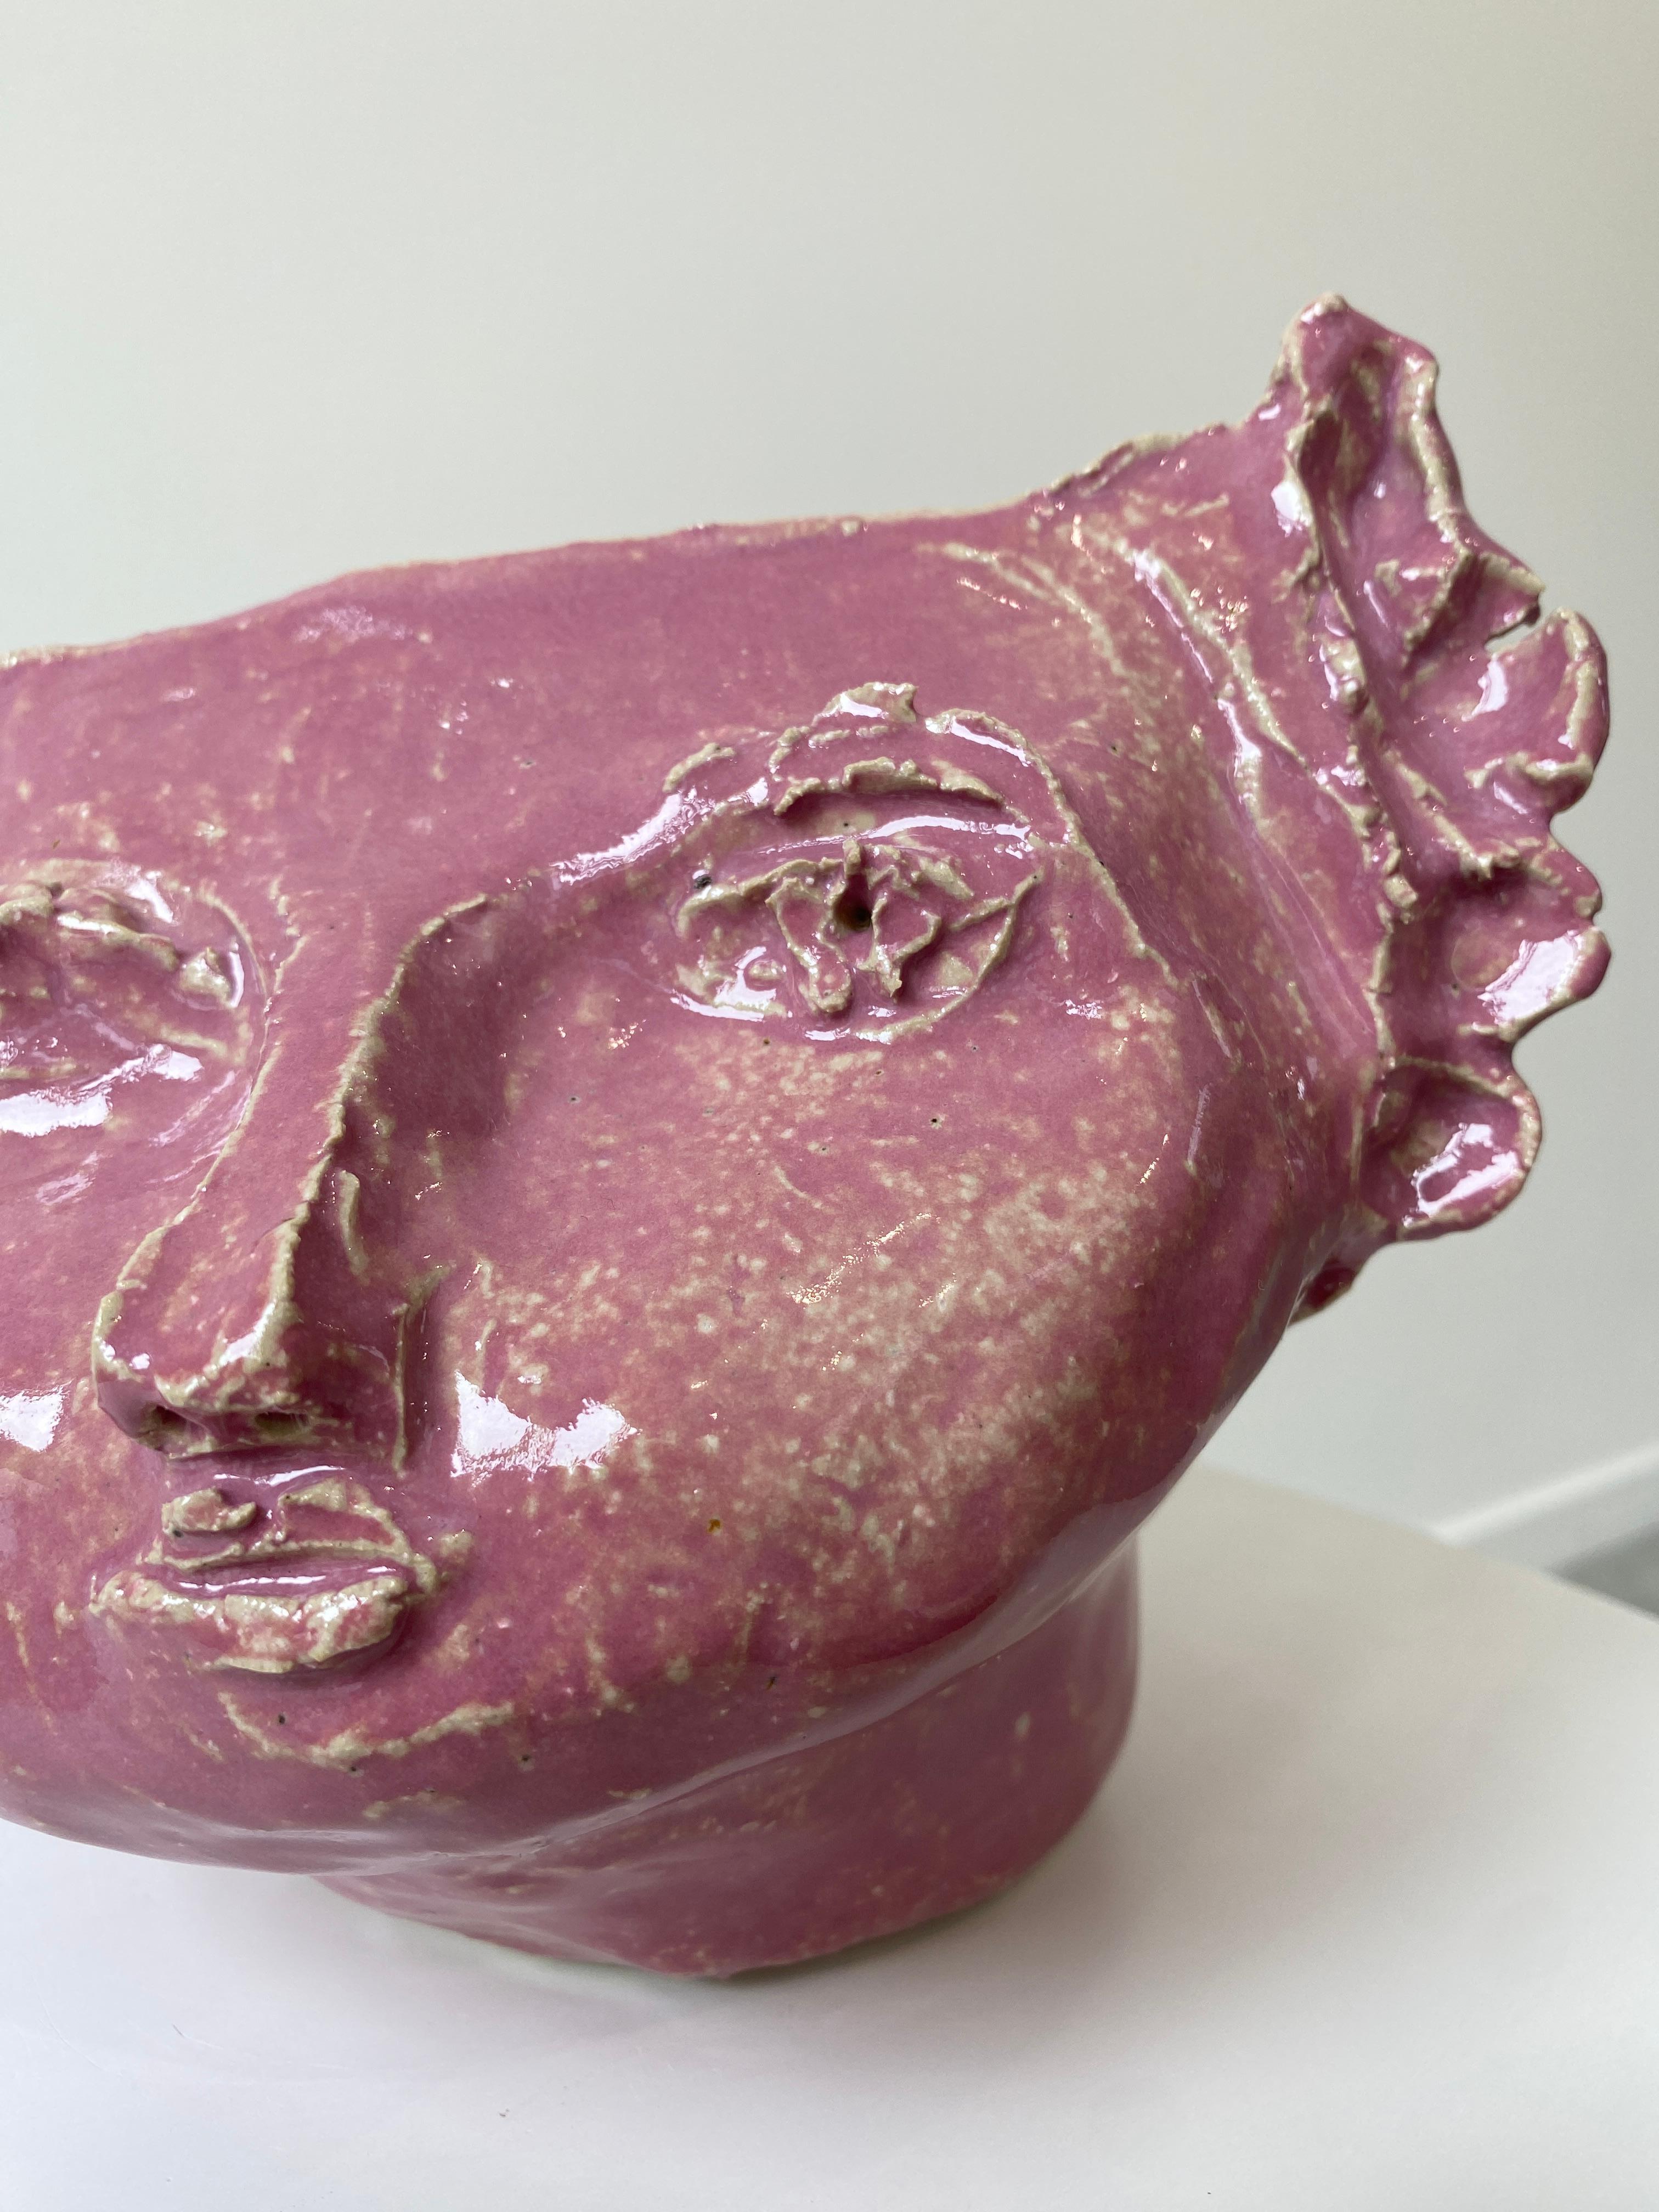 Pink sweet girl rustic wabi sabi hand sculpted glazed clay head face vessel vase For Sale 4